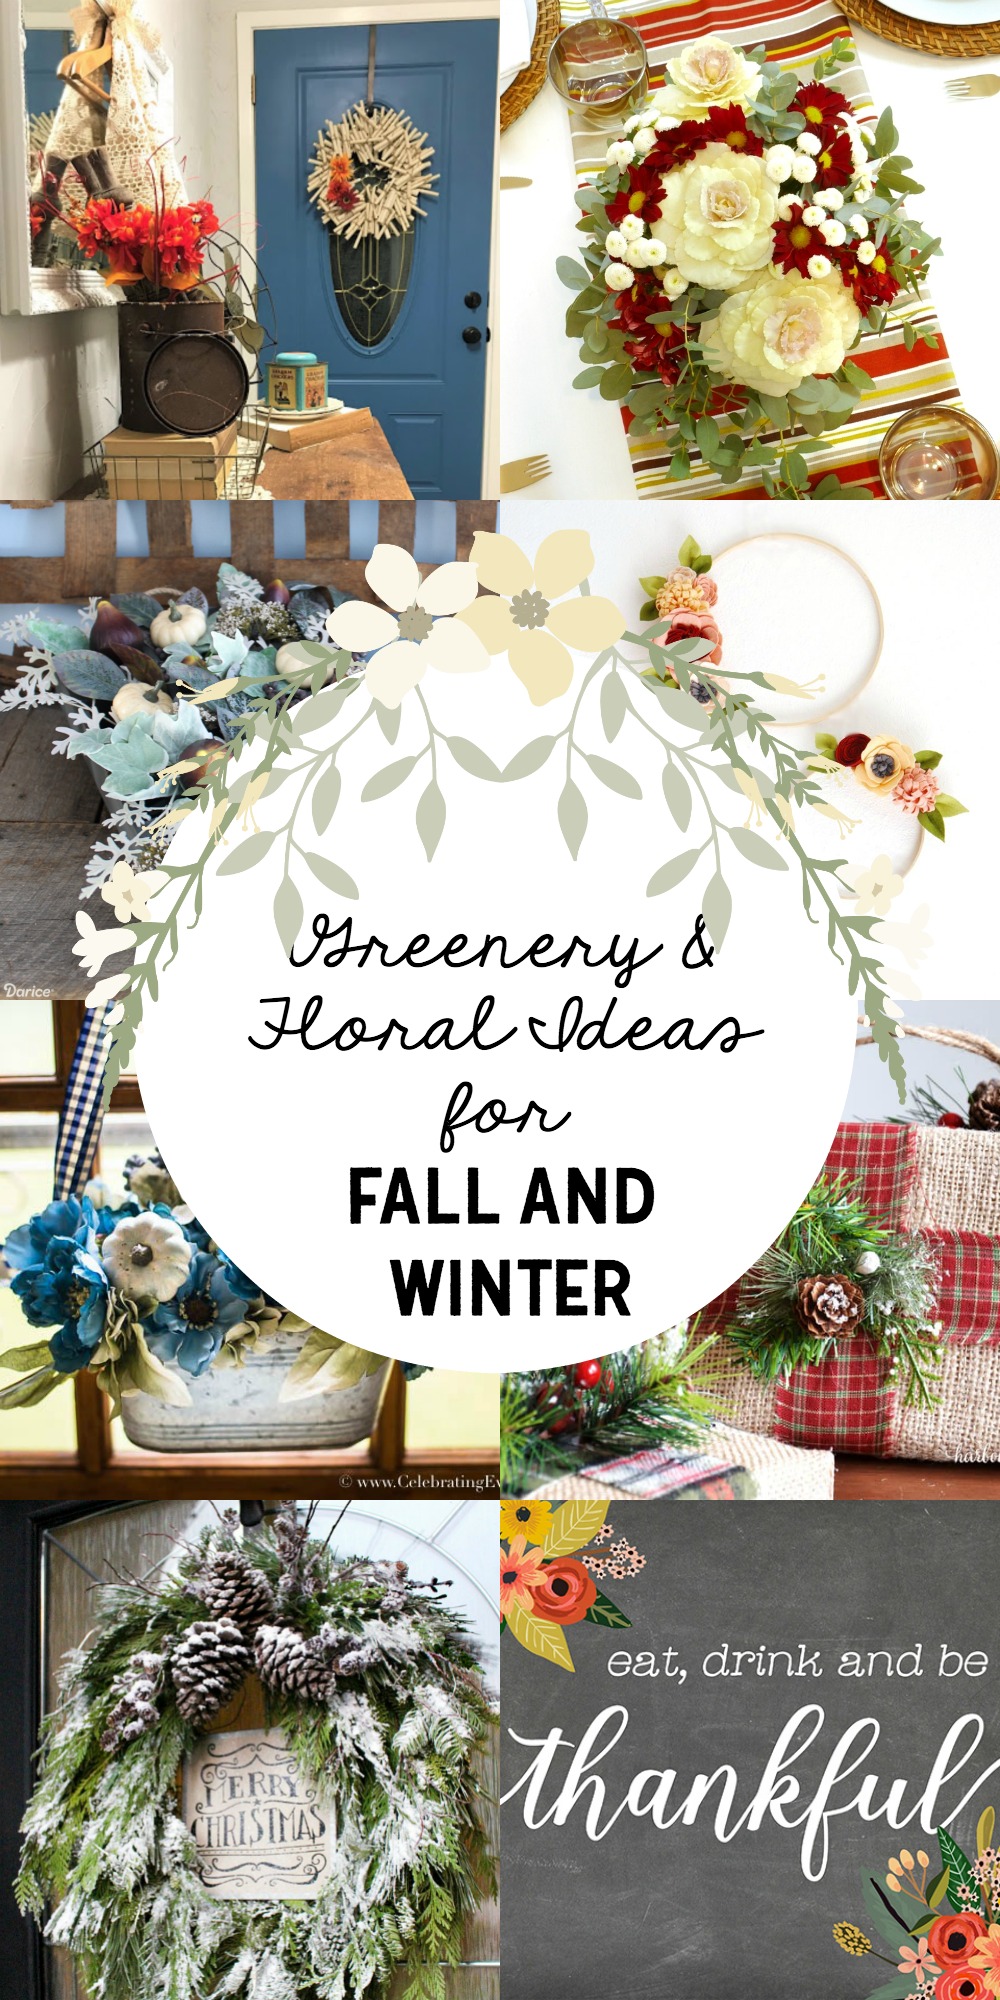 Greenery & Floral Ideas for Fall and Winter